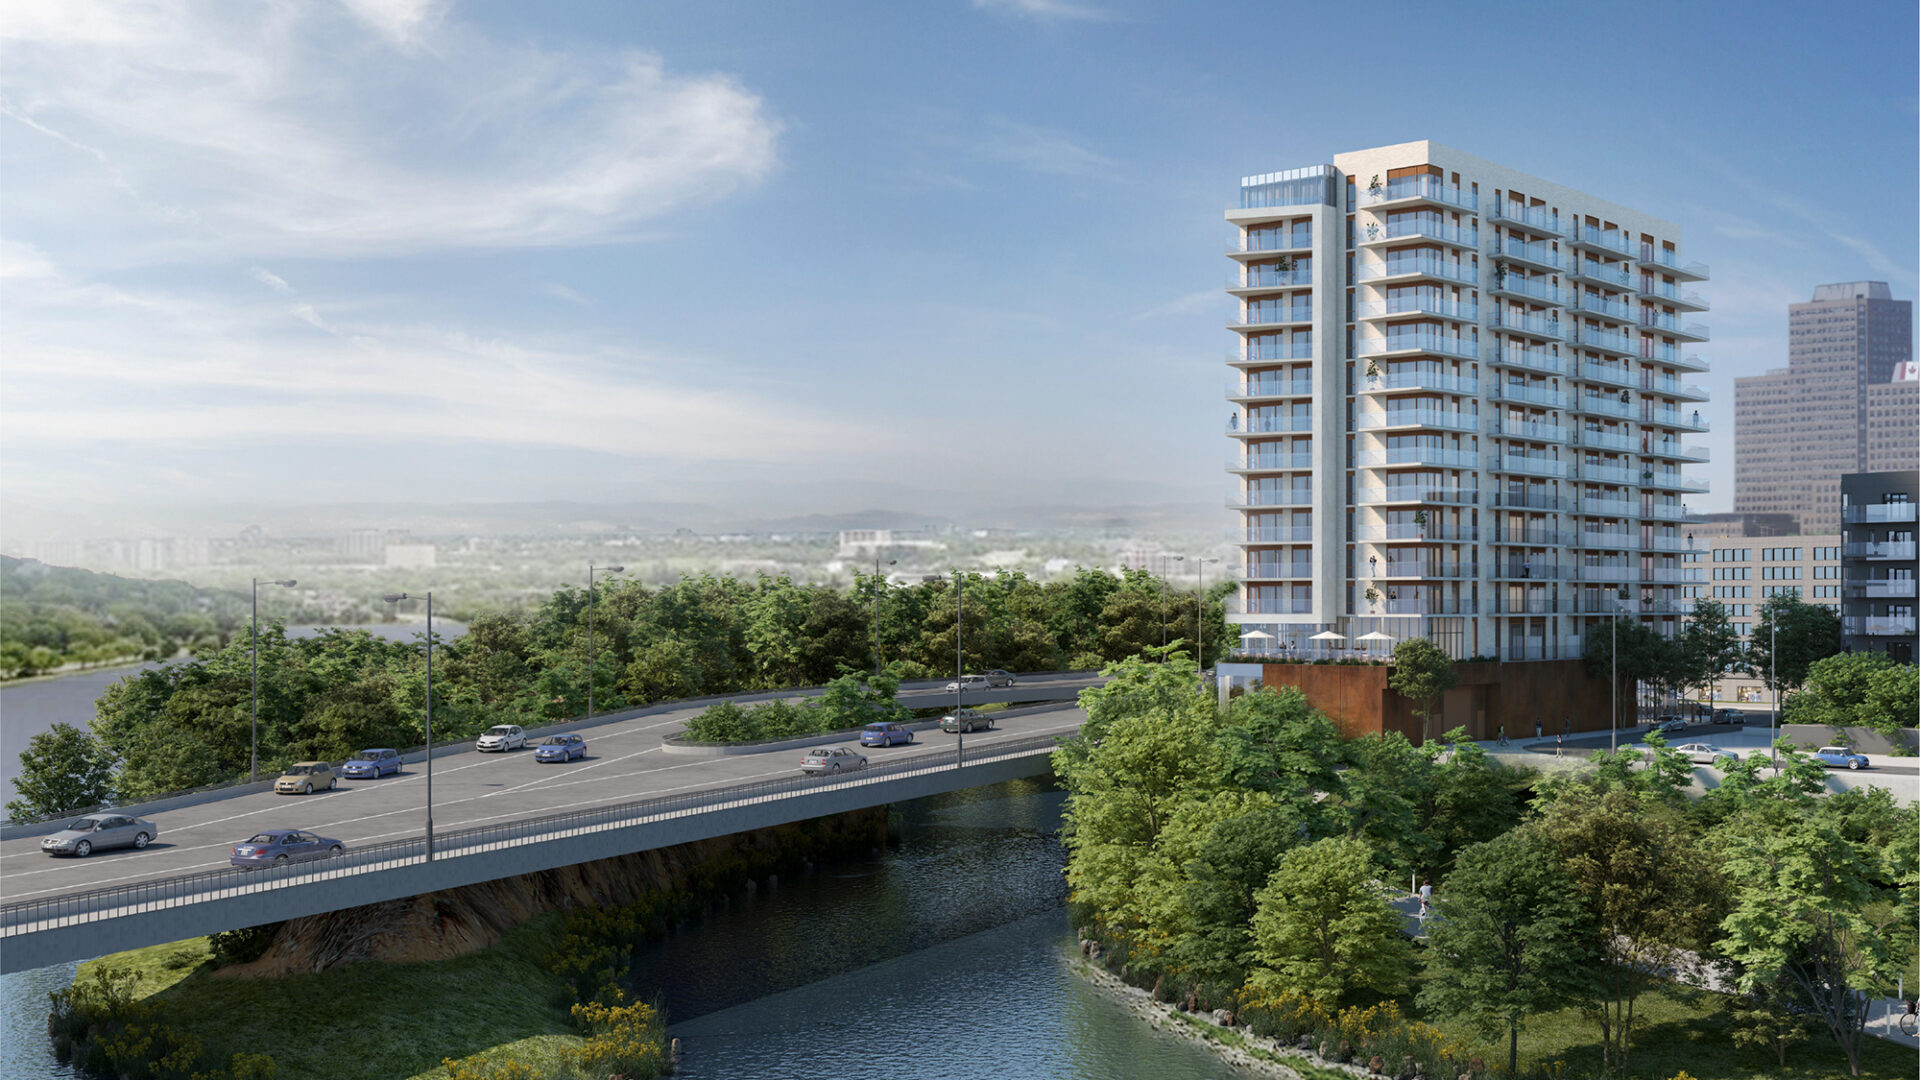 Large residential tower overlooking a river and a bridge, surrounded by trees and greenery